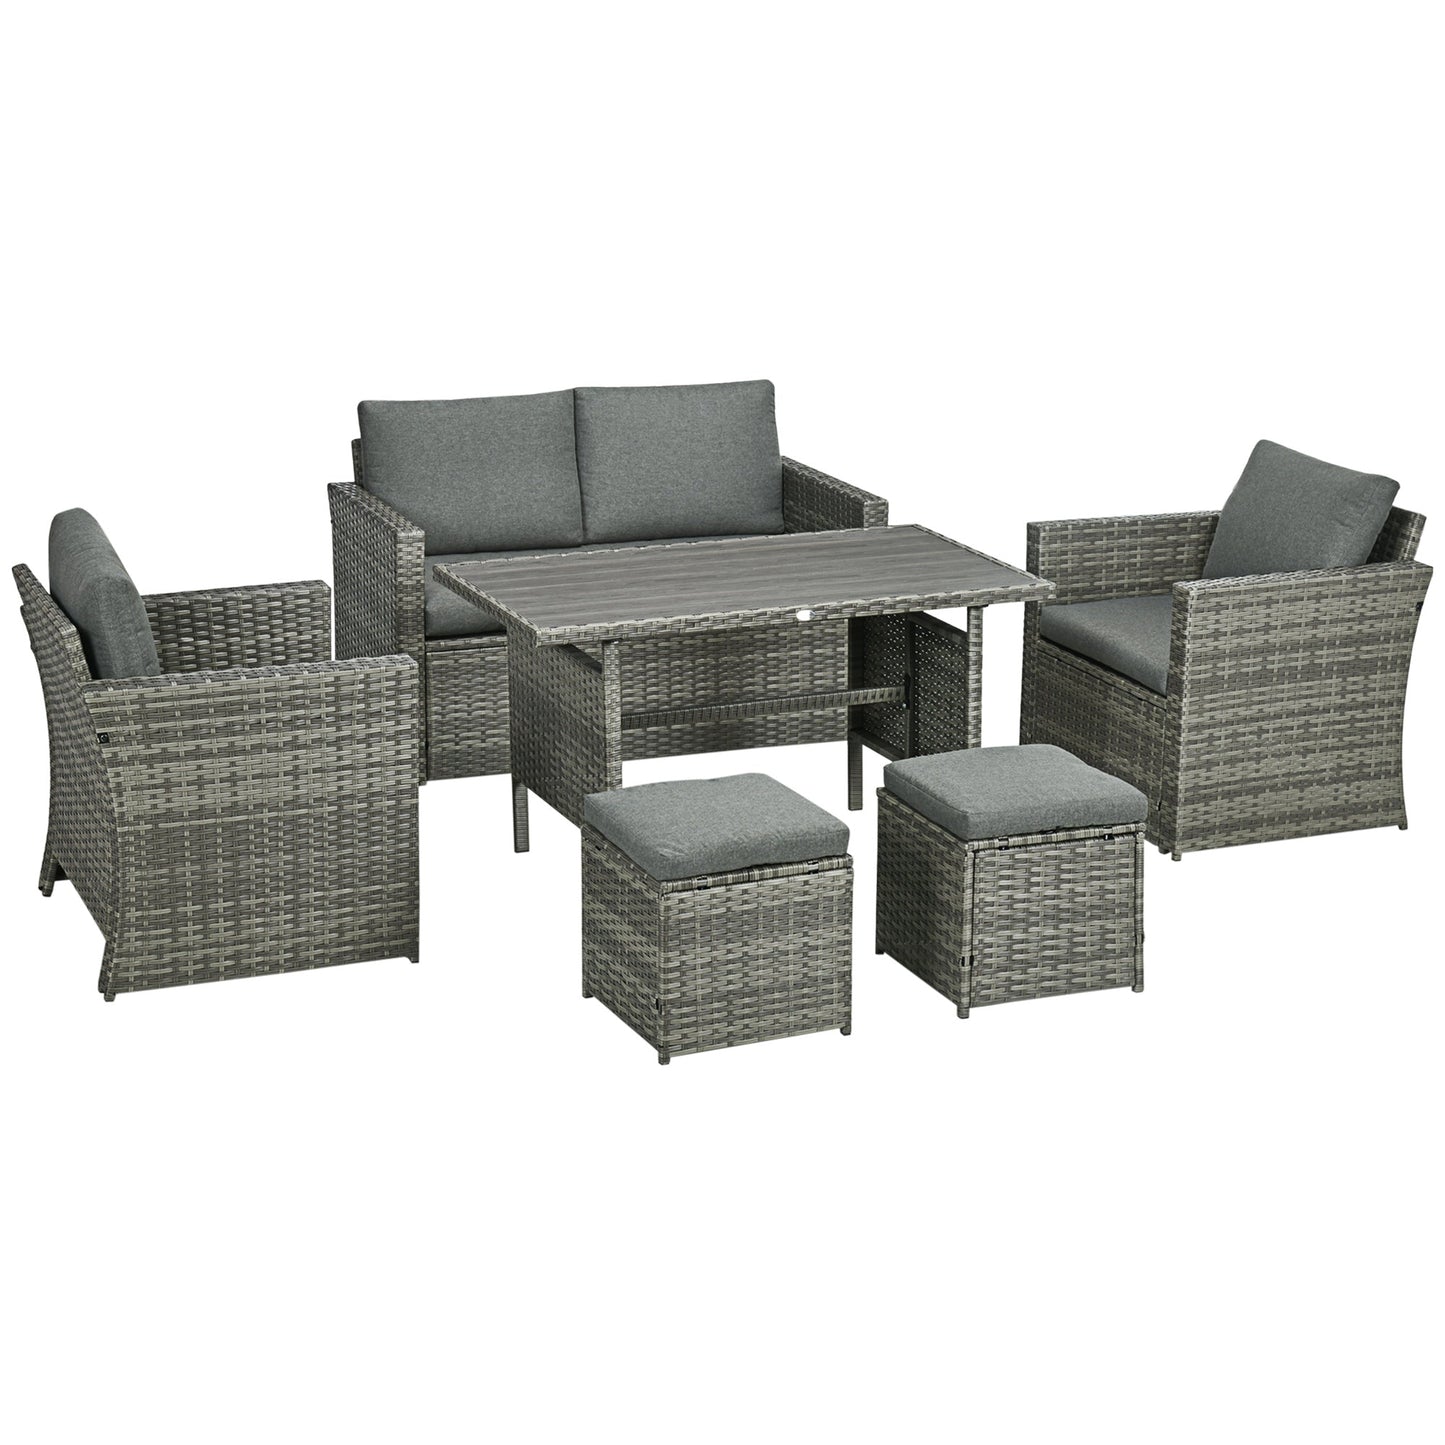 Outdoor and Garden-6 Pieces Patio Dining Set, PE Rattan Furniture Set with 2 Chairs Cushions & Outdoor Loveseat Sofa, Woodgrain Slatted Dinner Table, Mixed Gray - Outdoor Style Company